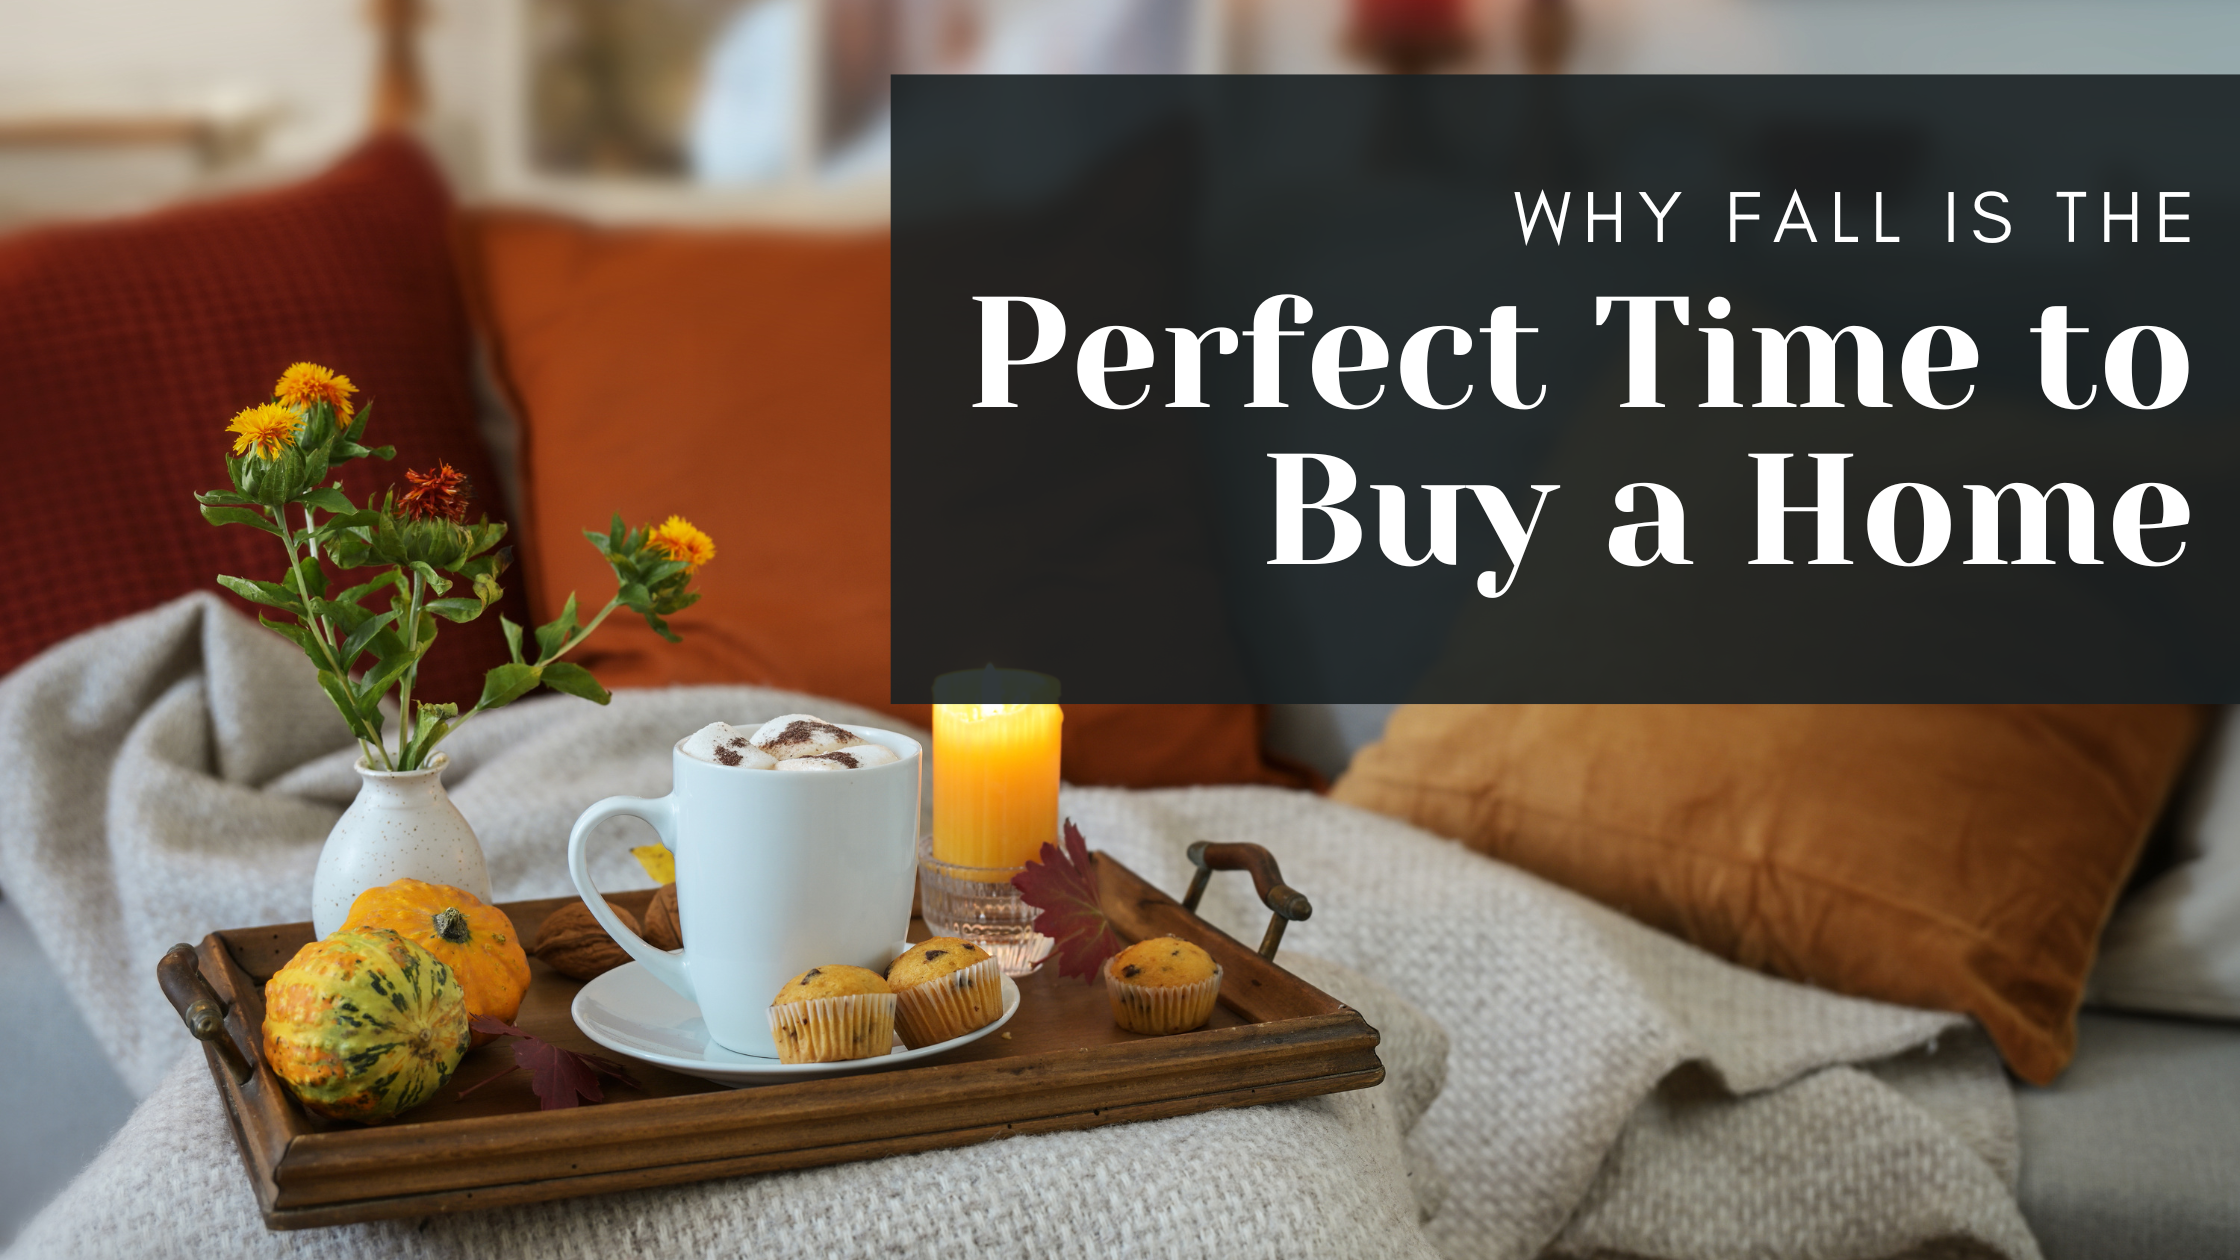 Why Fall is the Perfect Time to Buy a Home